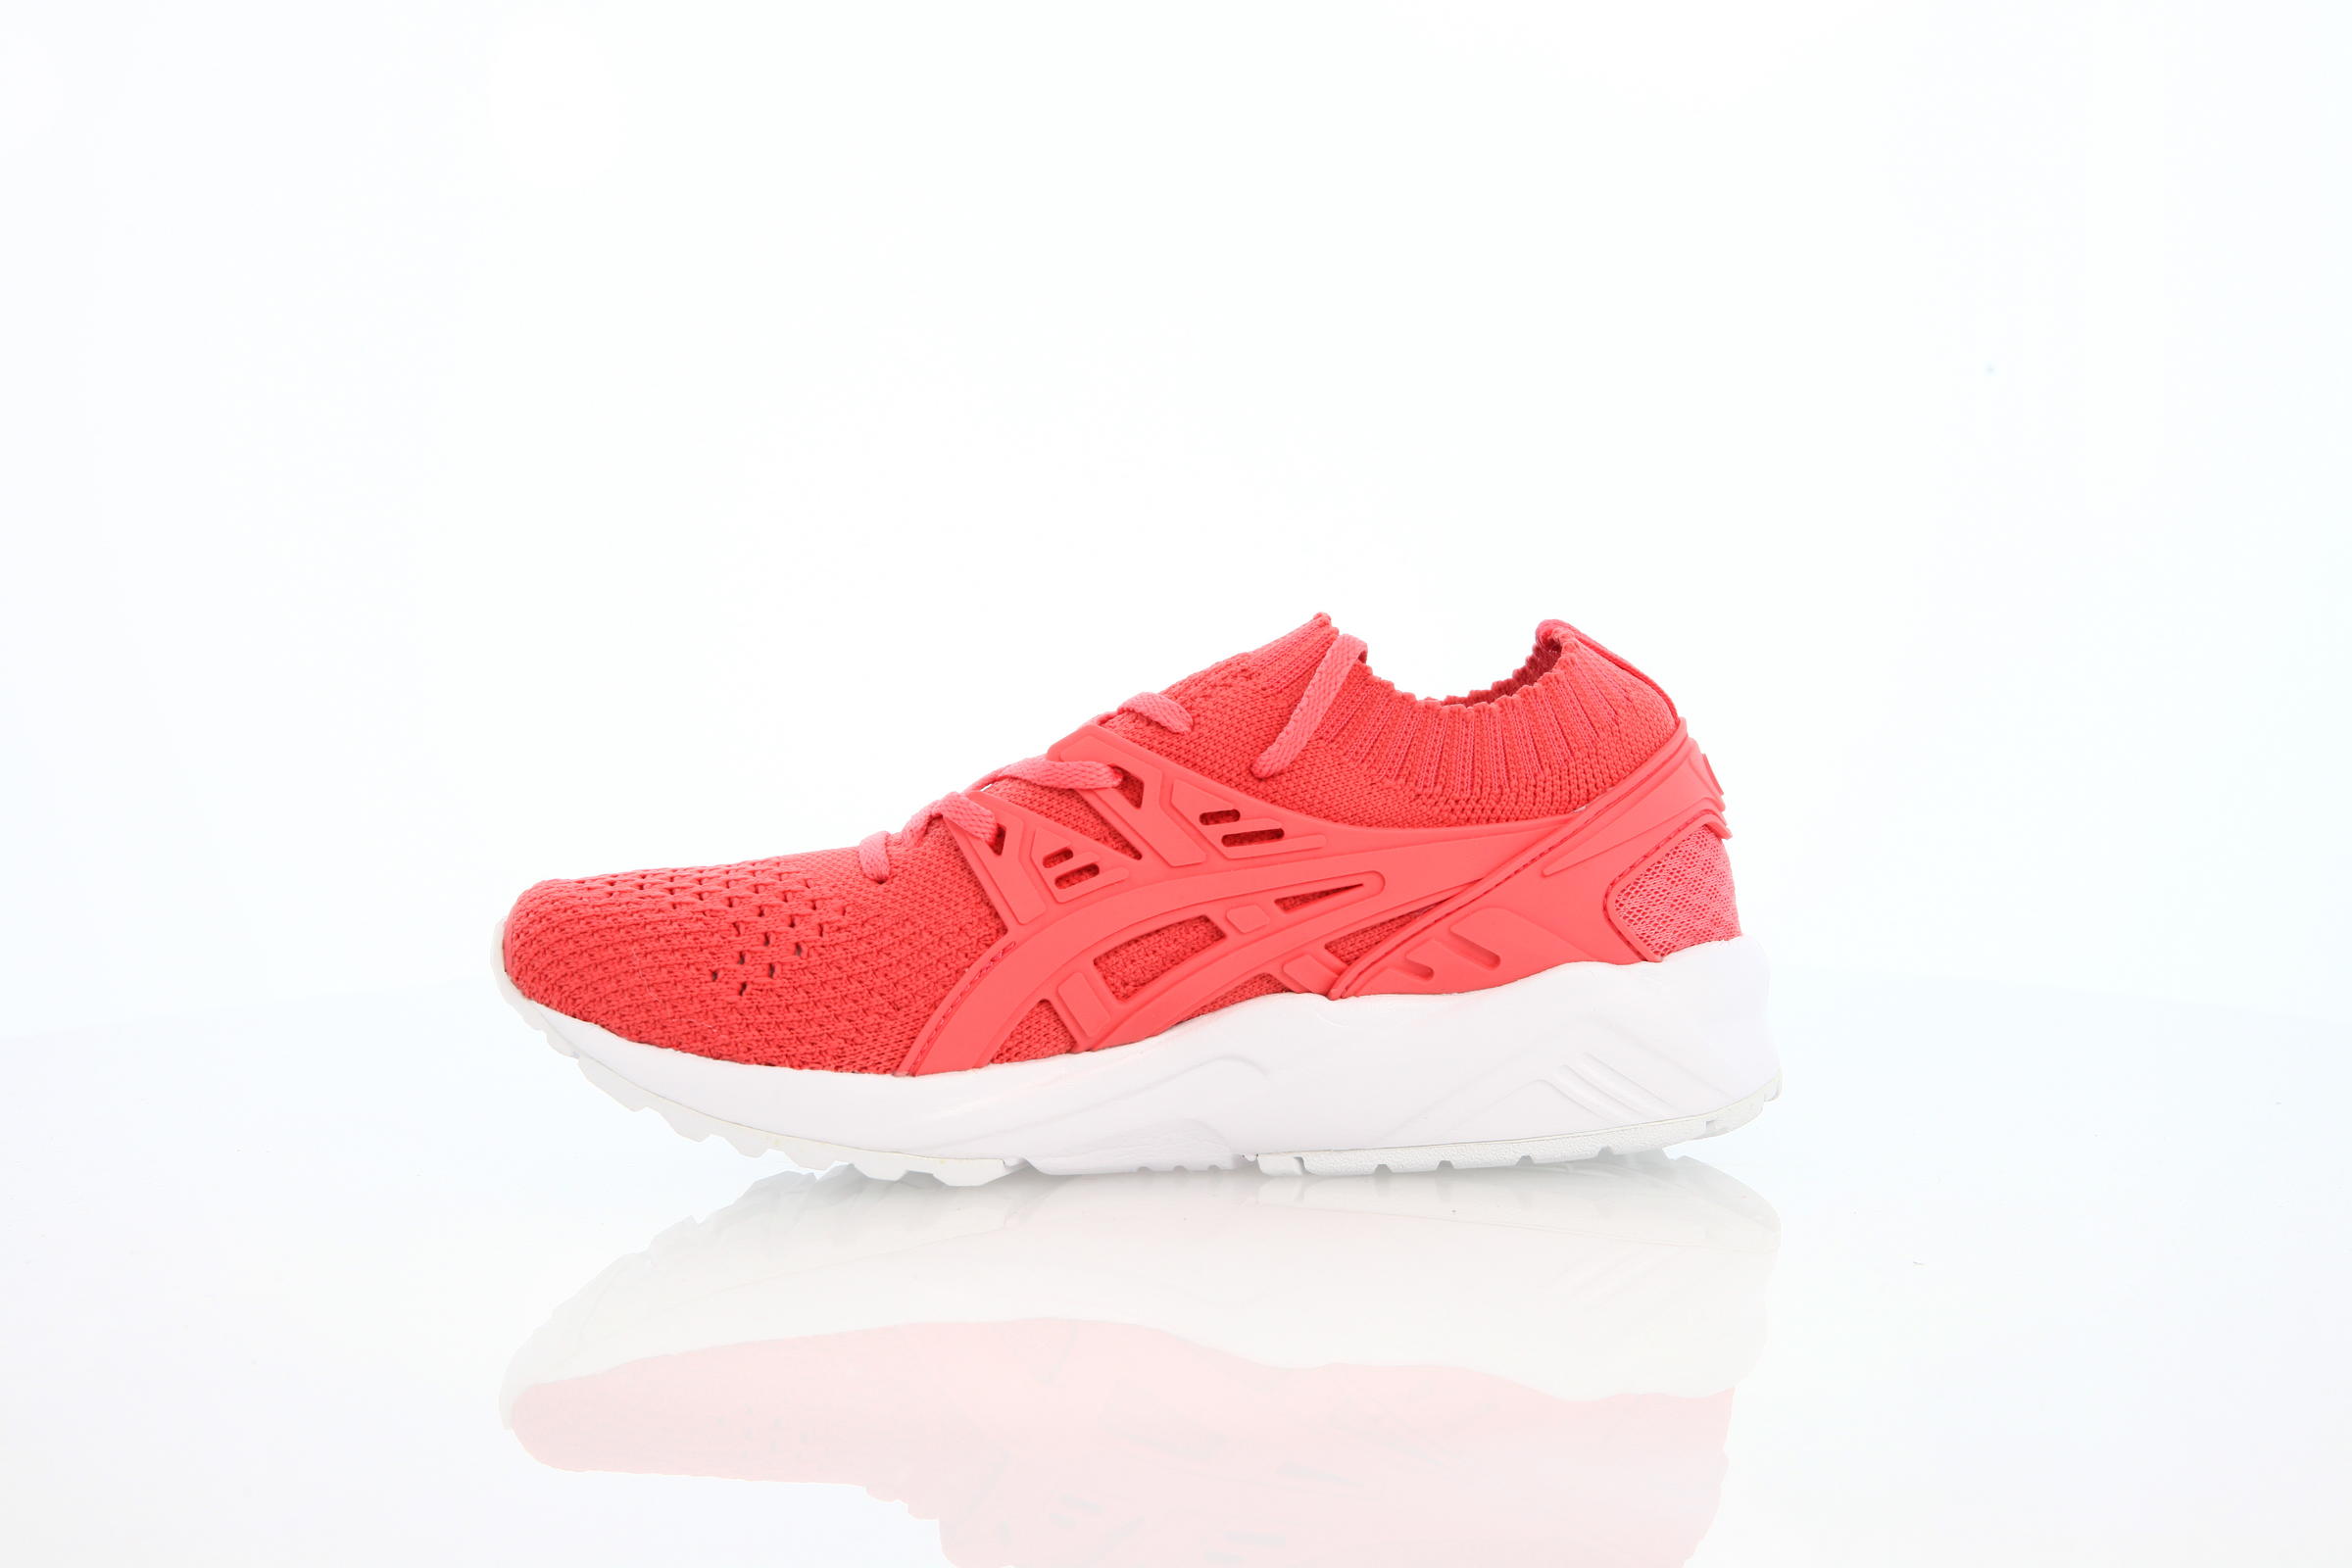 Asics Gel-Kayano Trainer One Piece Knit Pack "Peach"